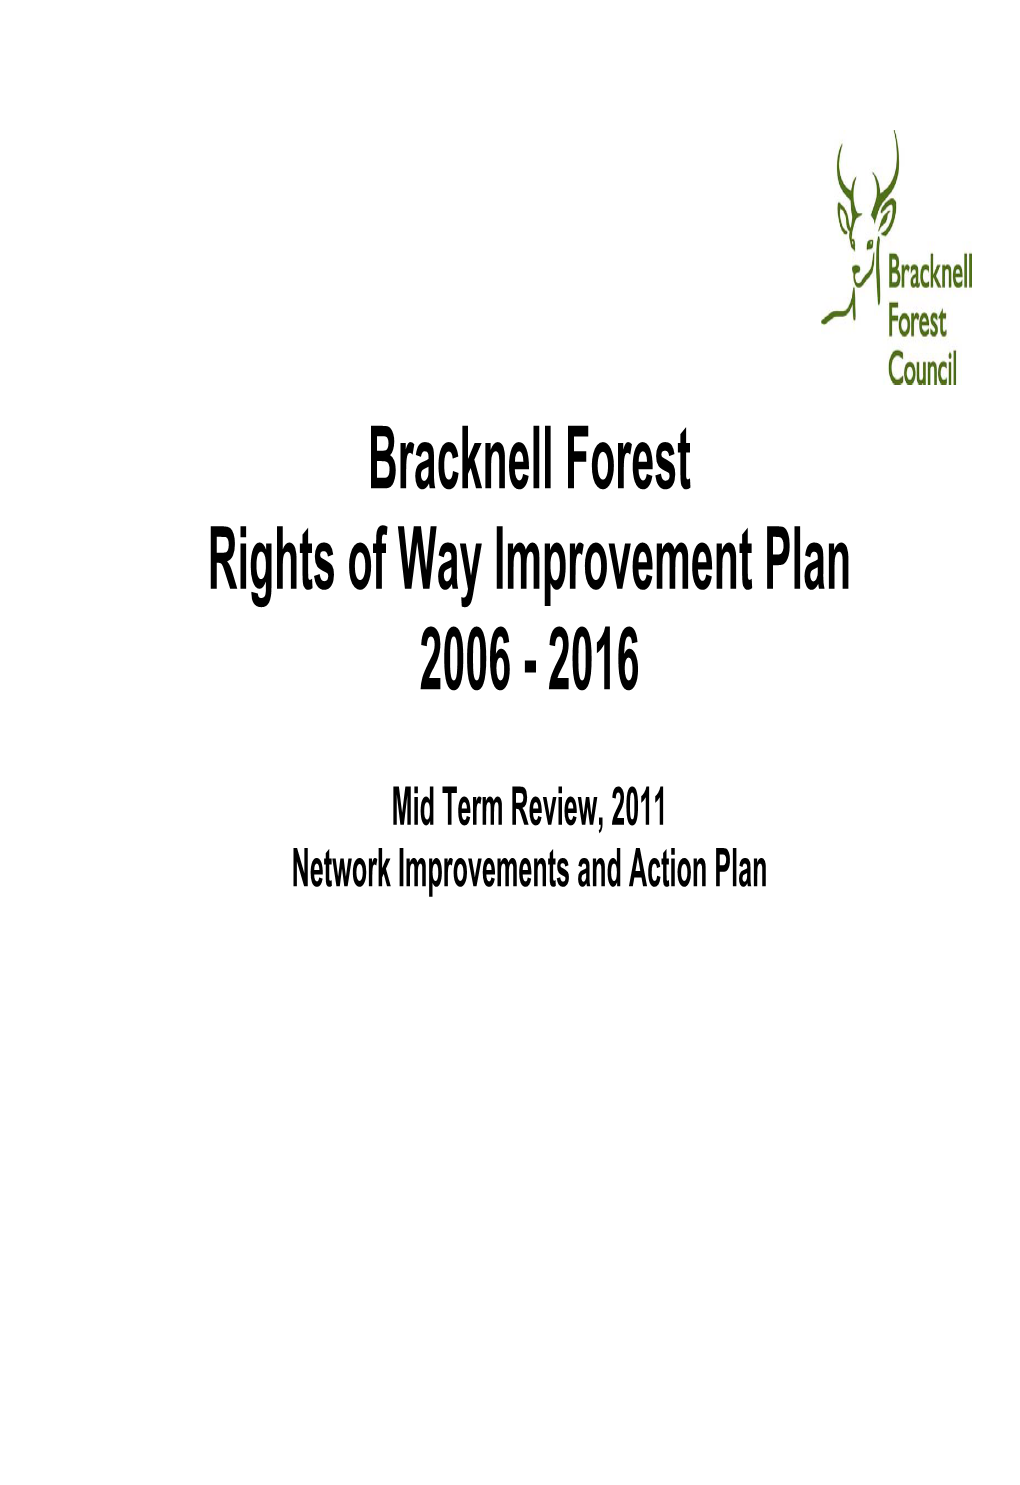 Bracknell Forest ROWIP1 Council’S Rights of Way Network Since 2006